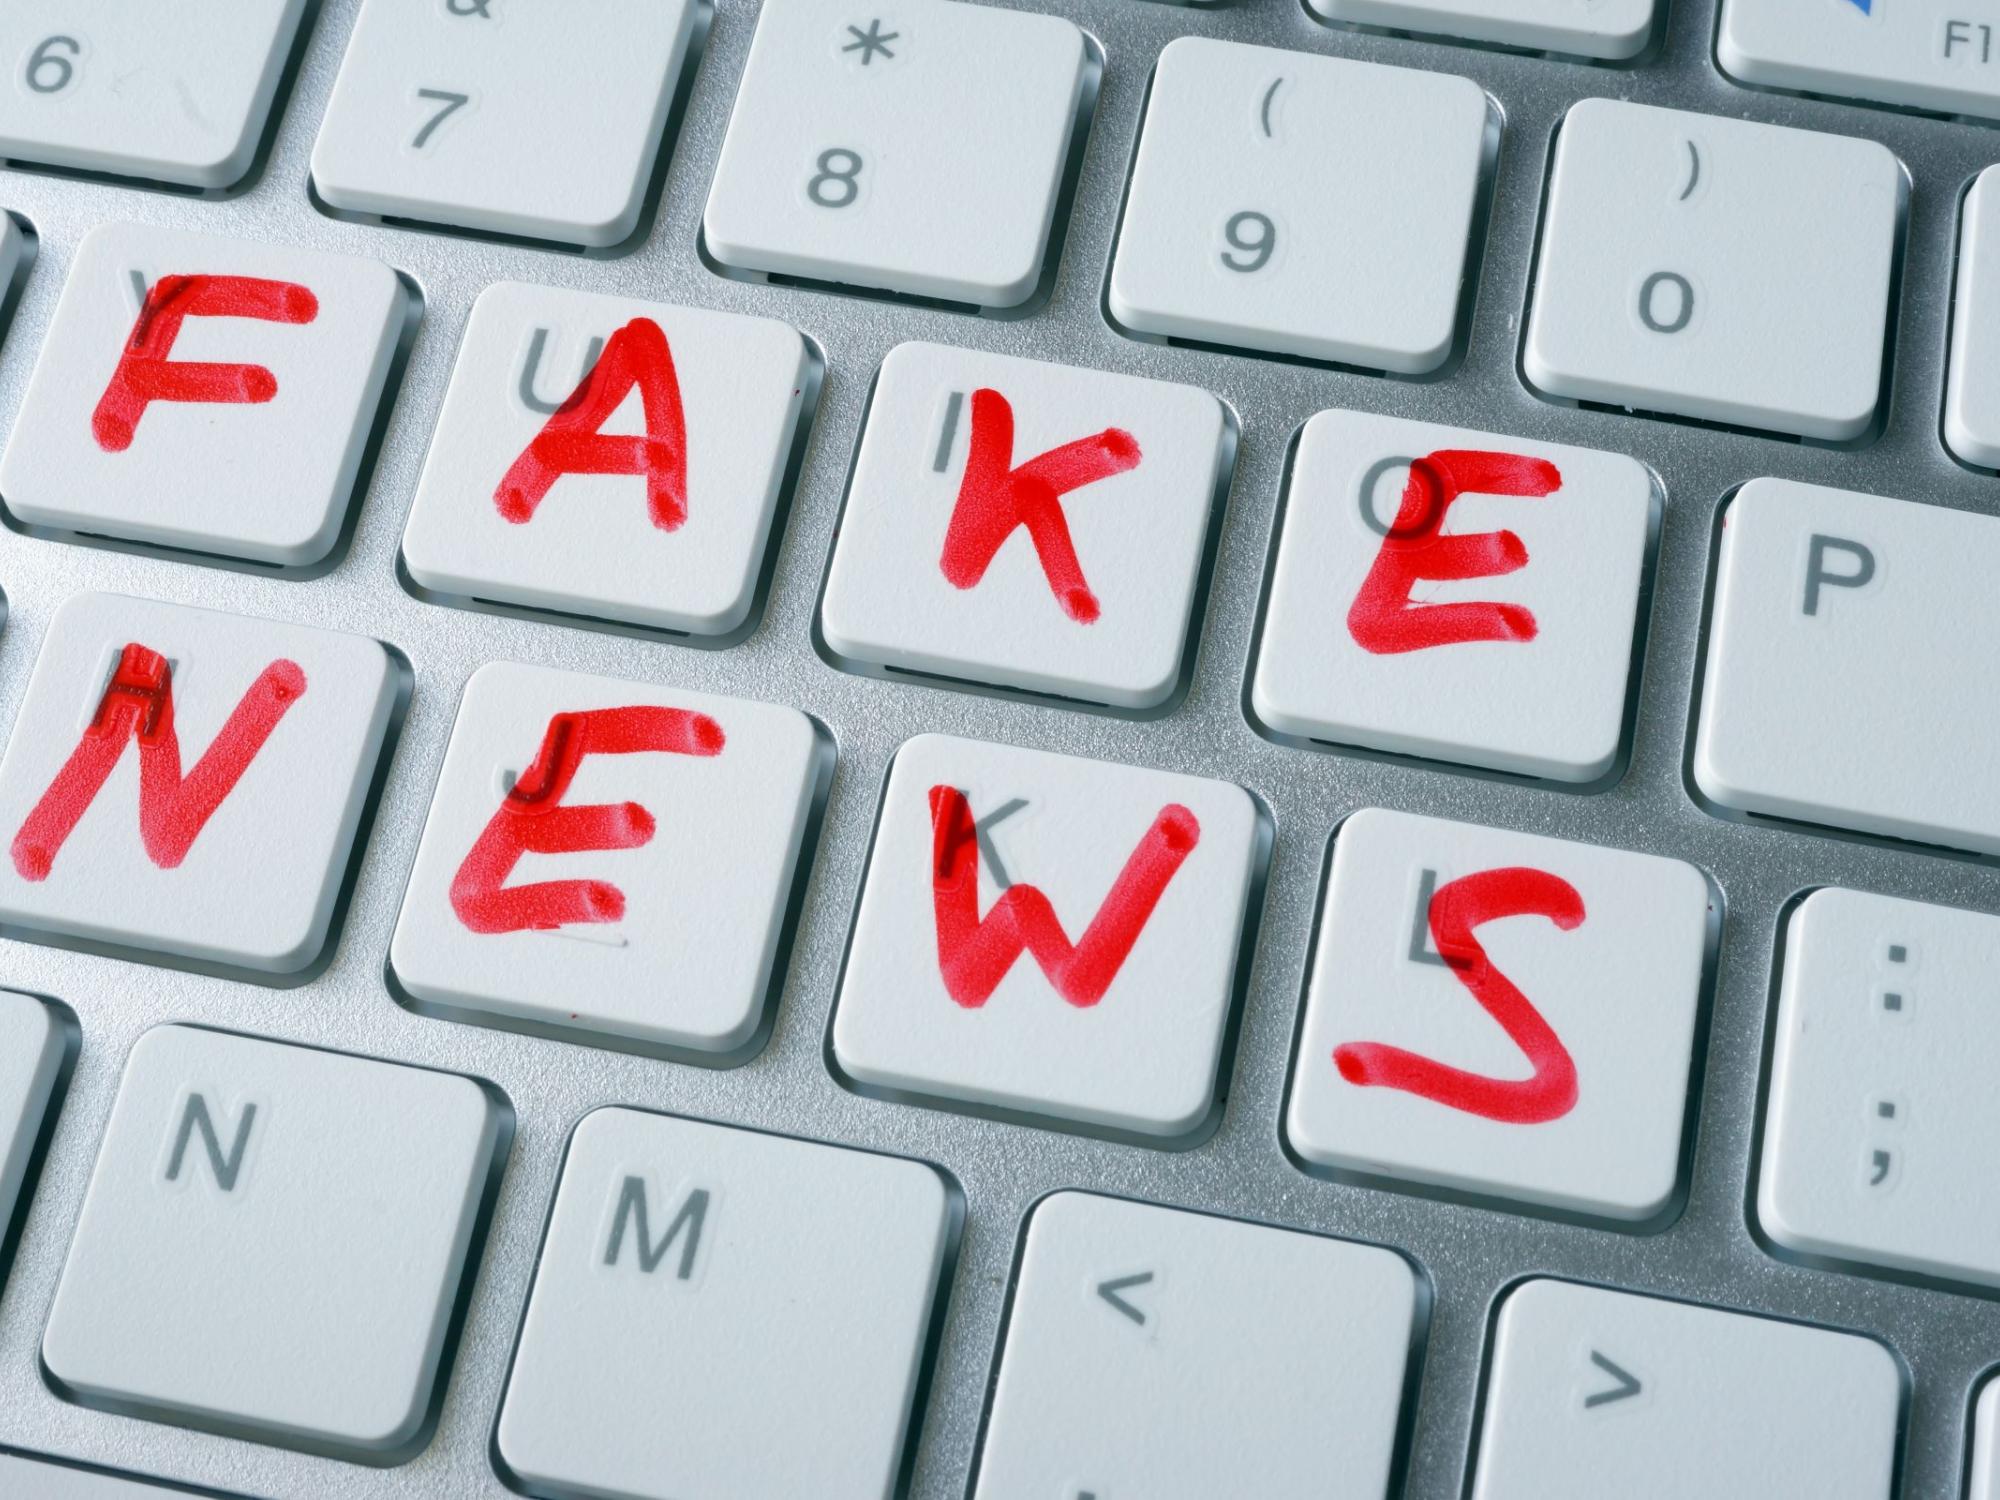 Competition highlights believable fake news created with generative AI tools